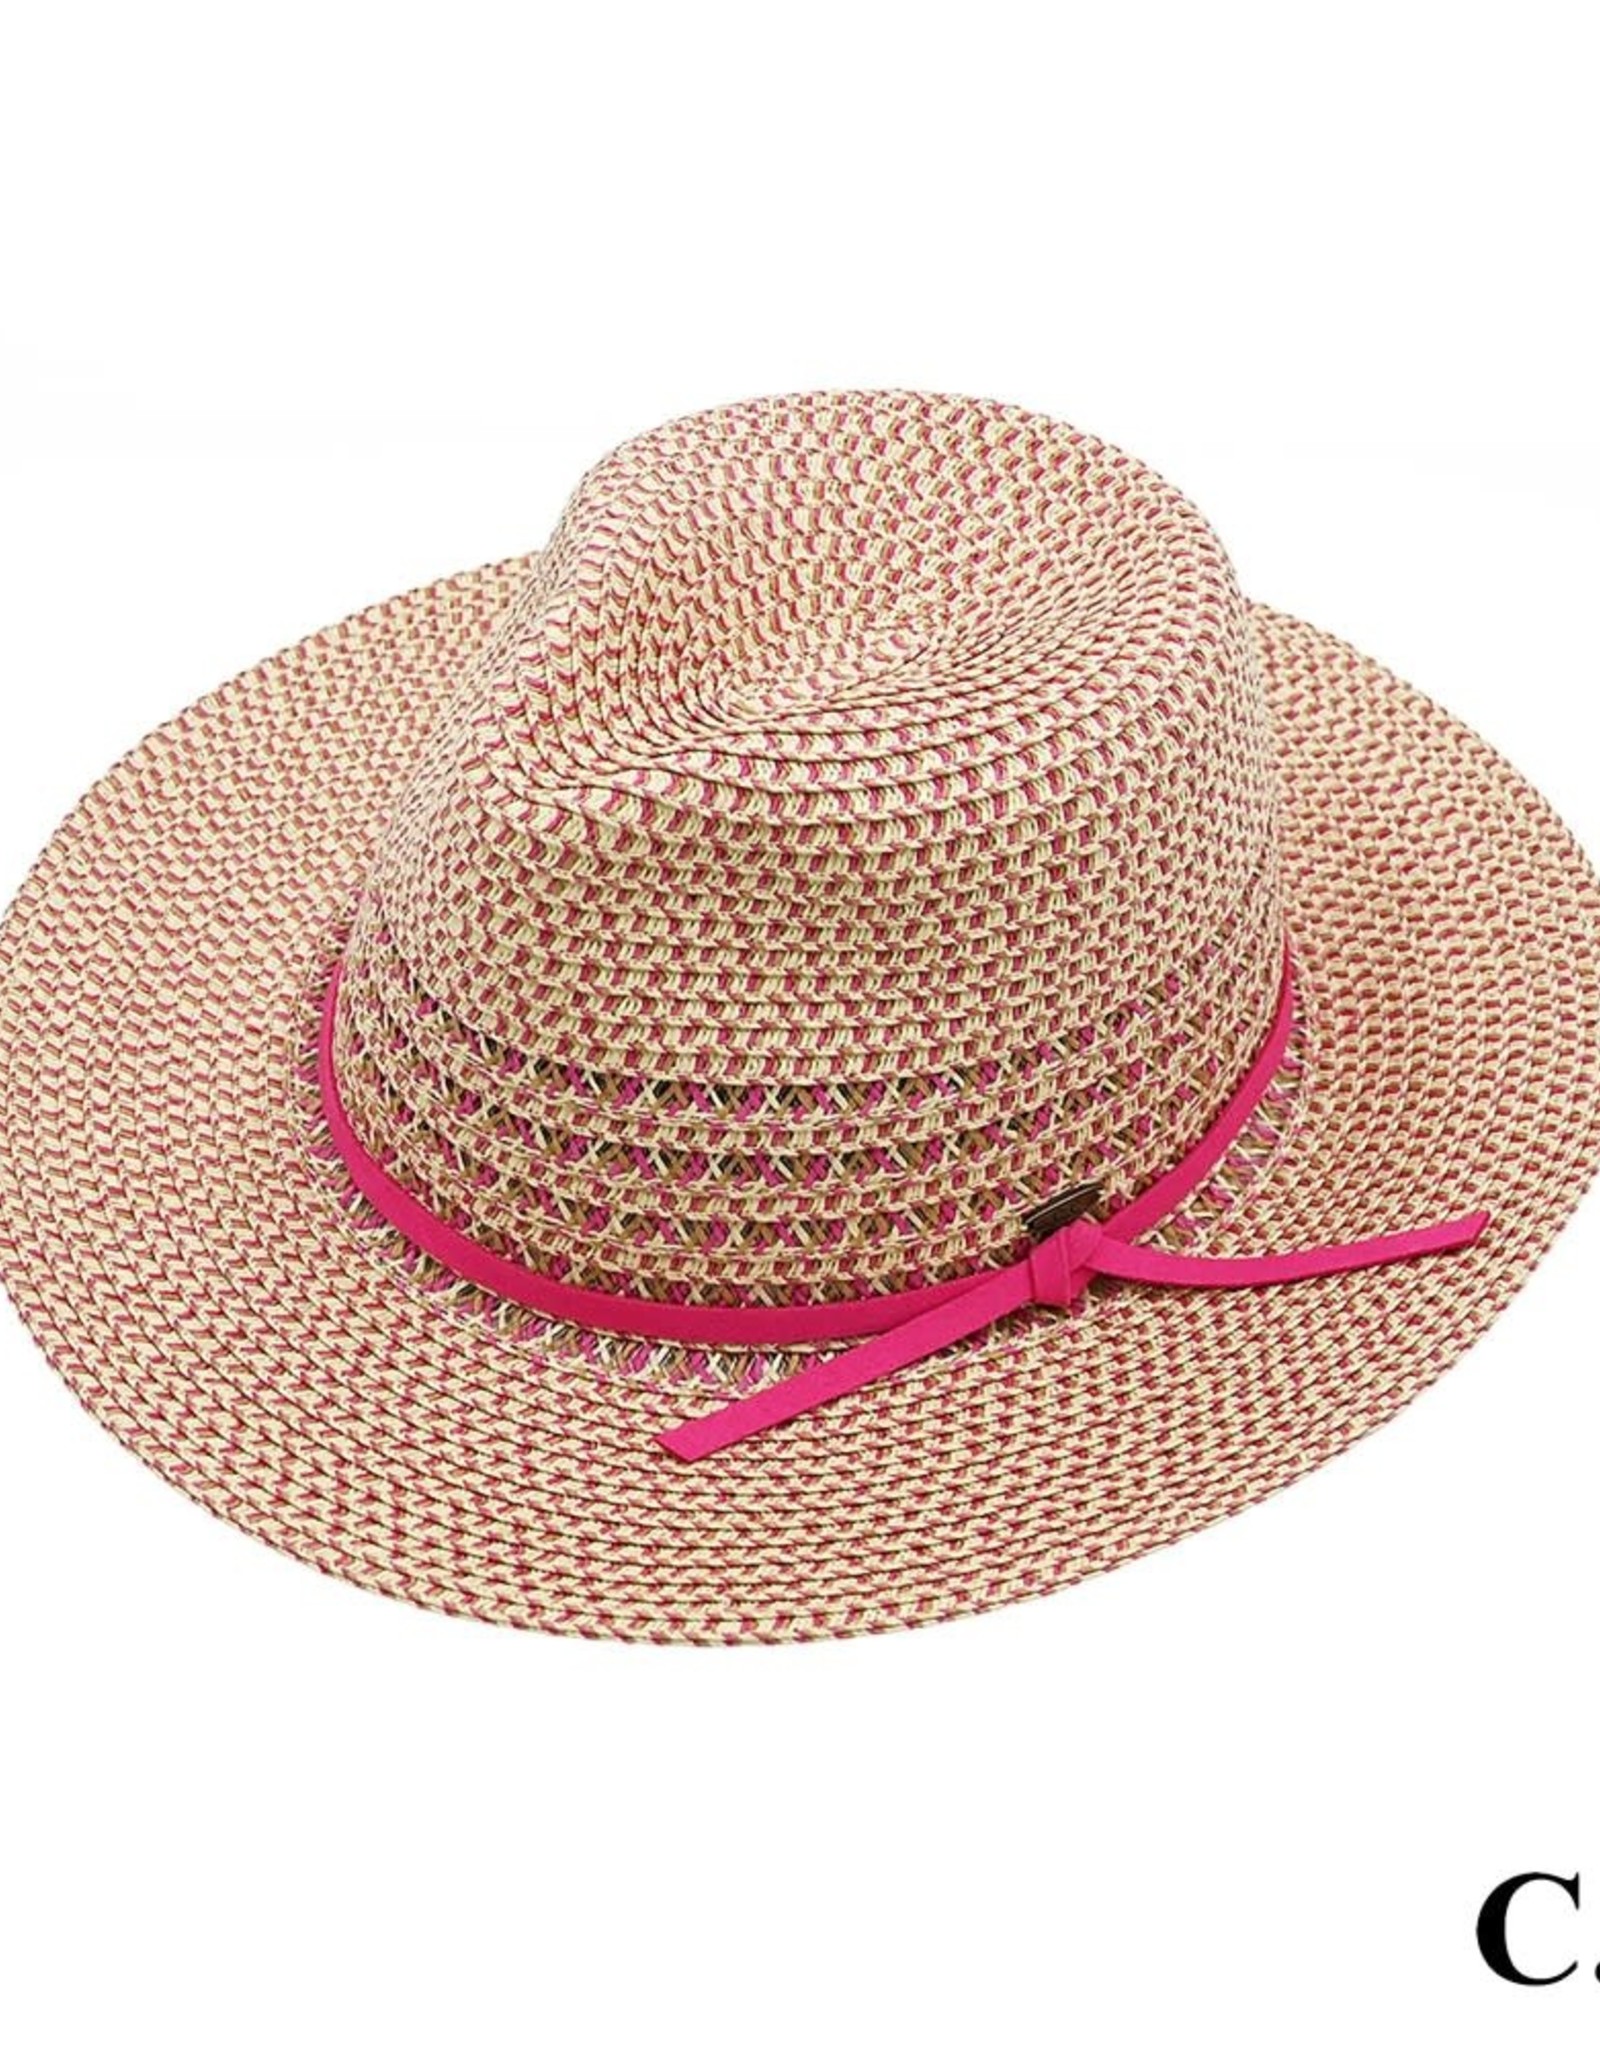 judson 729203 - C.C Multi-Color Heather Panama Straw Hat With Faux Suede Trim Band  - Hot Pink